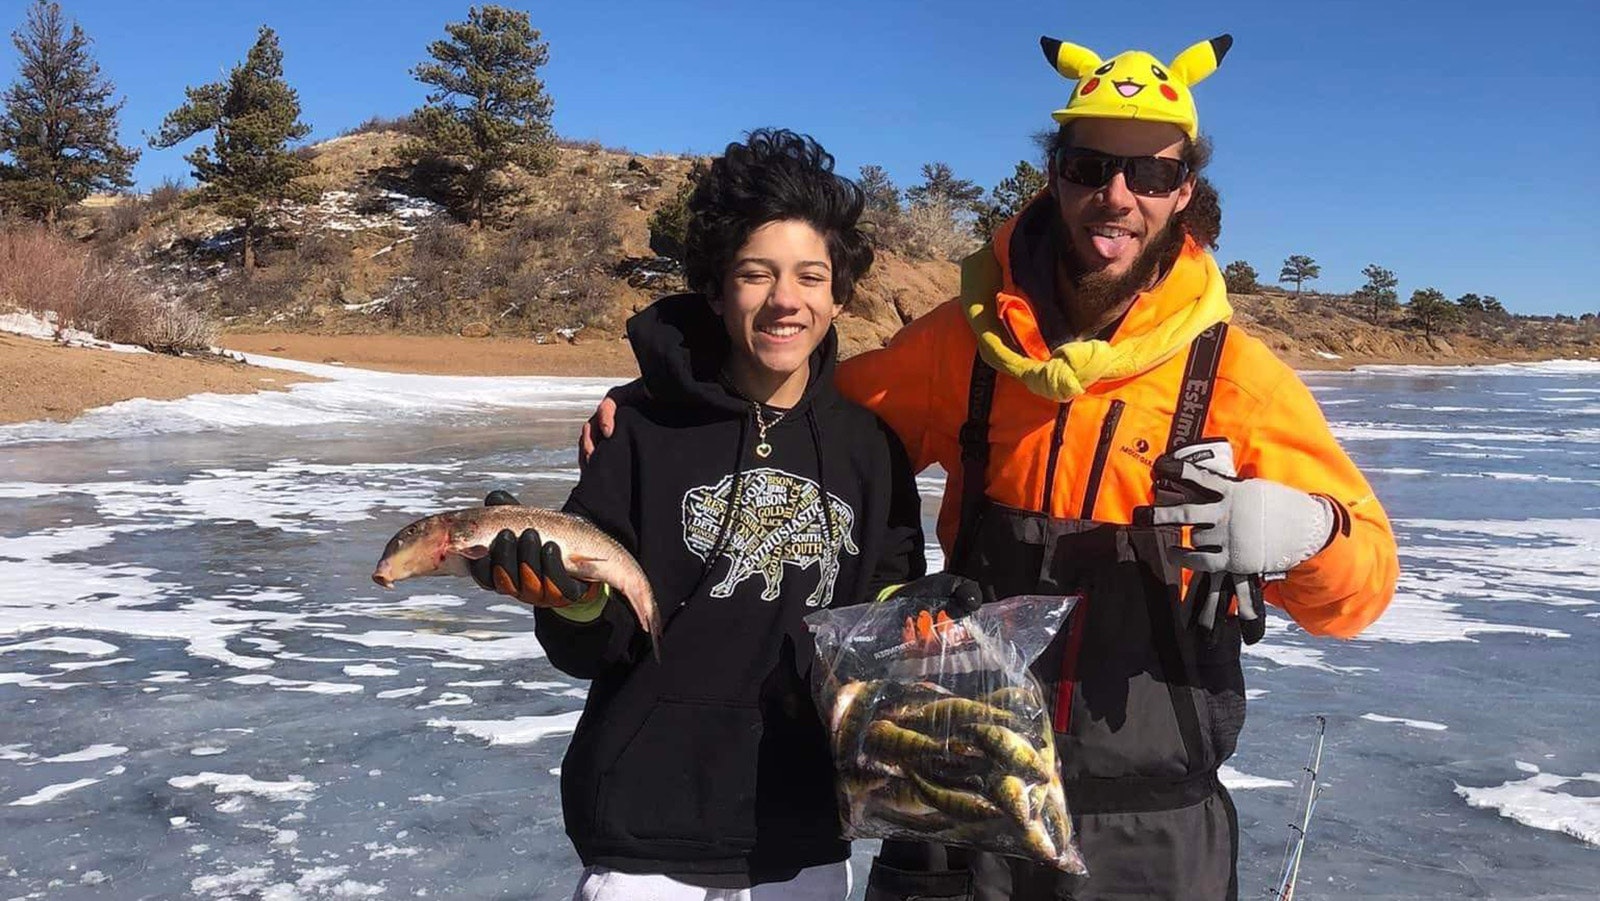 Angel Smith, aka the Everyday Pikachu Hat Fisherman, shares his love for Wyoming ice fishing on his YouTube channel.